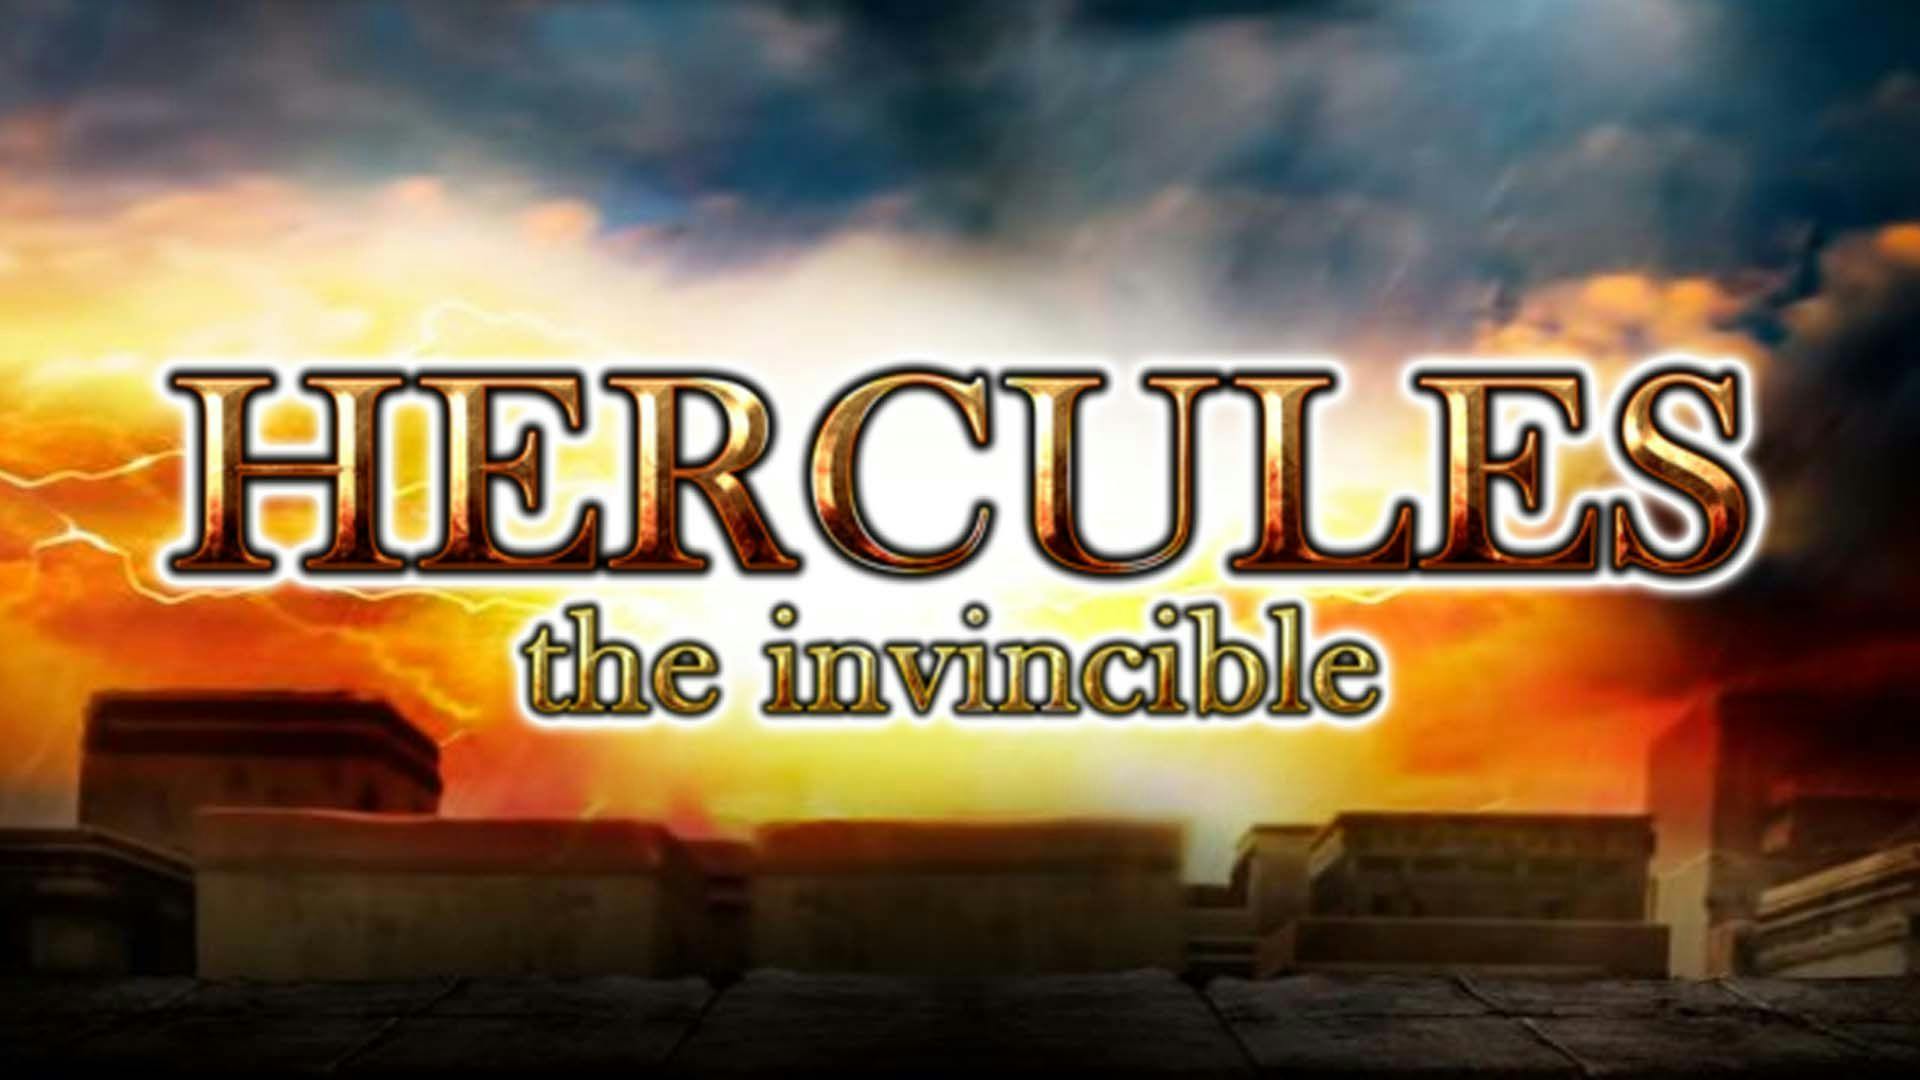 Hercules The Invincible Slot Machine Online Free Game Play